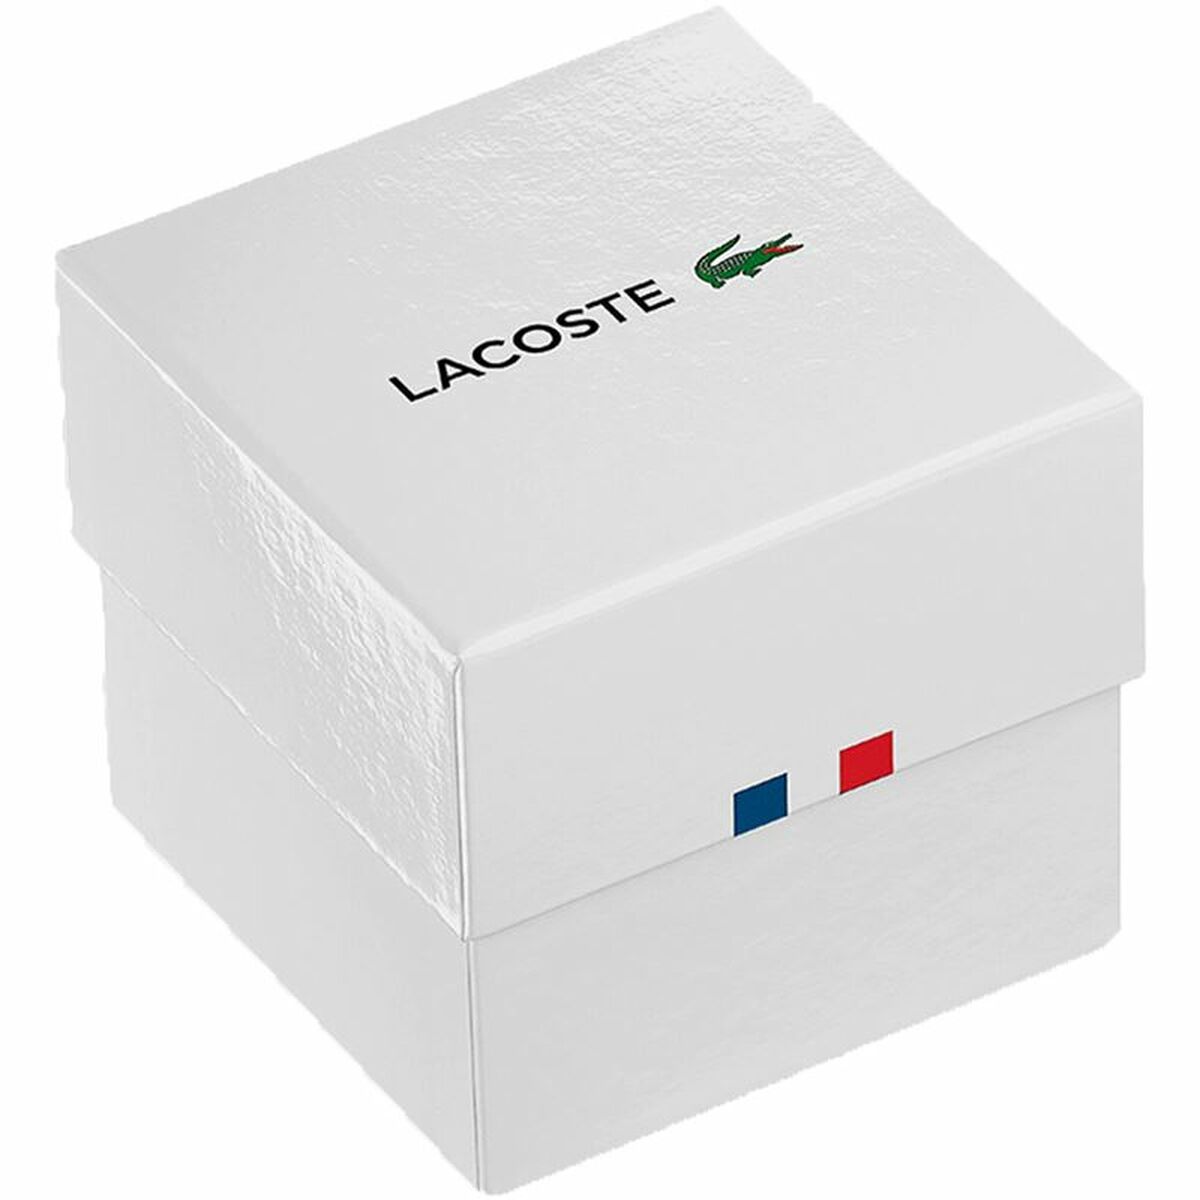 Men's Watch Lacoste 3 Le Croc, Lacoste, Watches, Men, mens-watch-lacoste-3-le-croc, Brand_Lacoste, category-reference-2570, category-reference-2635, category-reference-2994, category-reference-2996, category-reference-t-19667, category-reference-t-19724, Condition_NEW, fashion, original gifts, Price_100 - 200, RiotNook